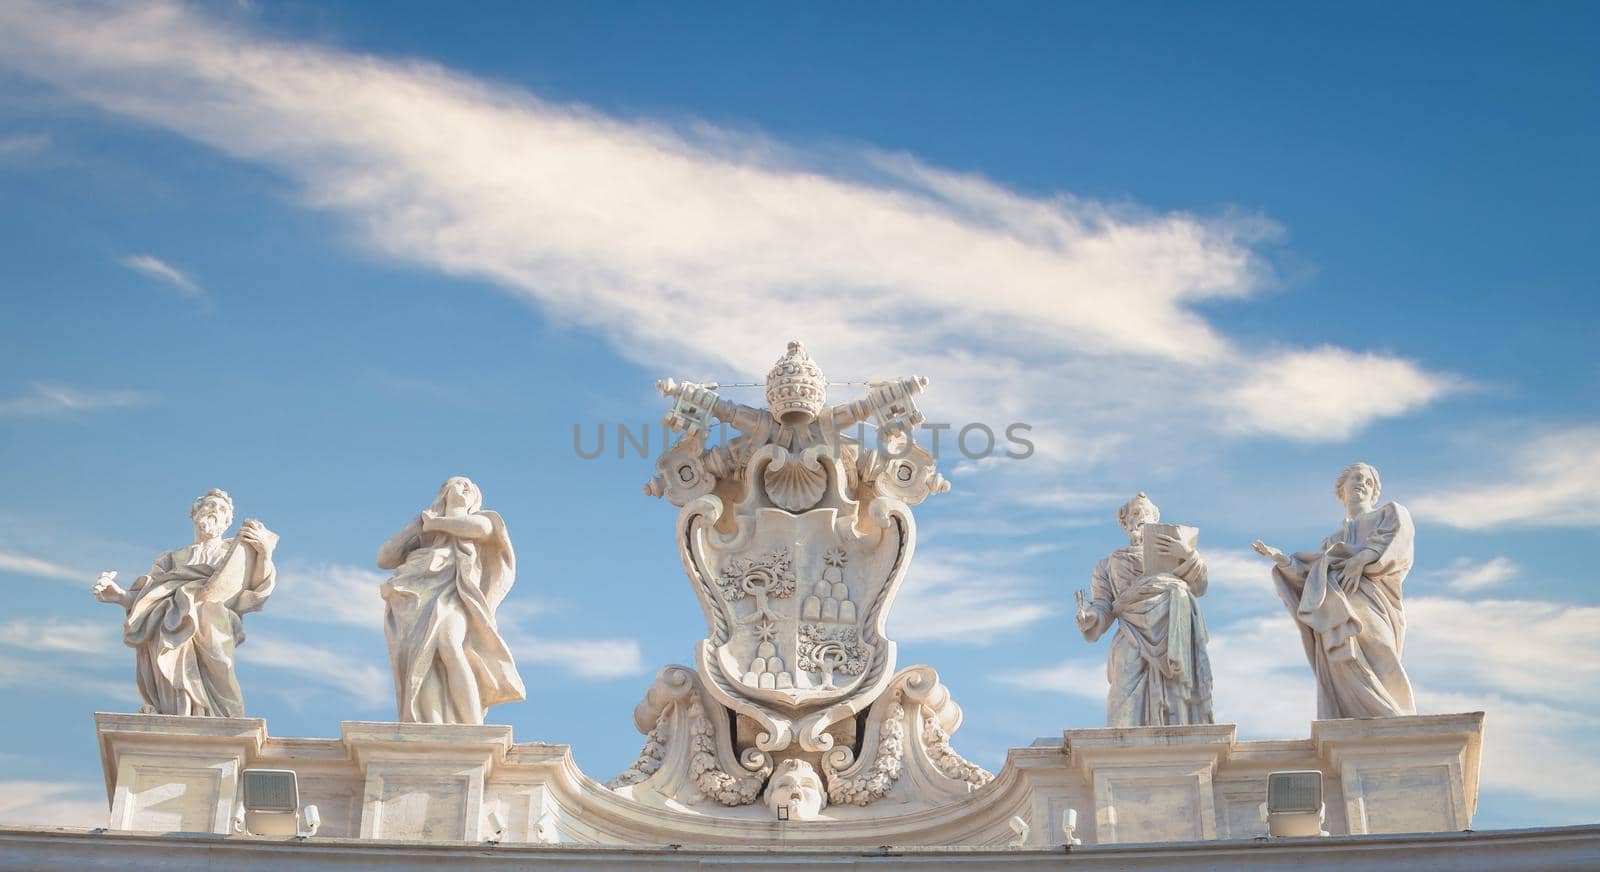 Antique Vatican symbol located in Saint Peter Square, Rome, Italy by Perseomedusa